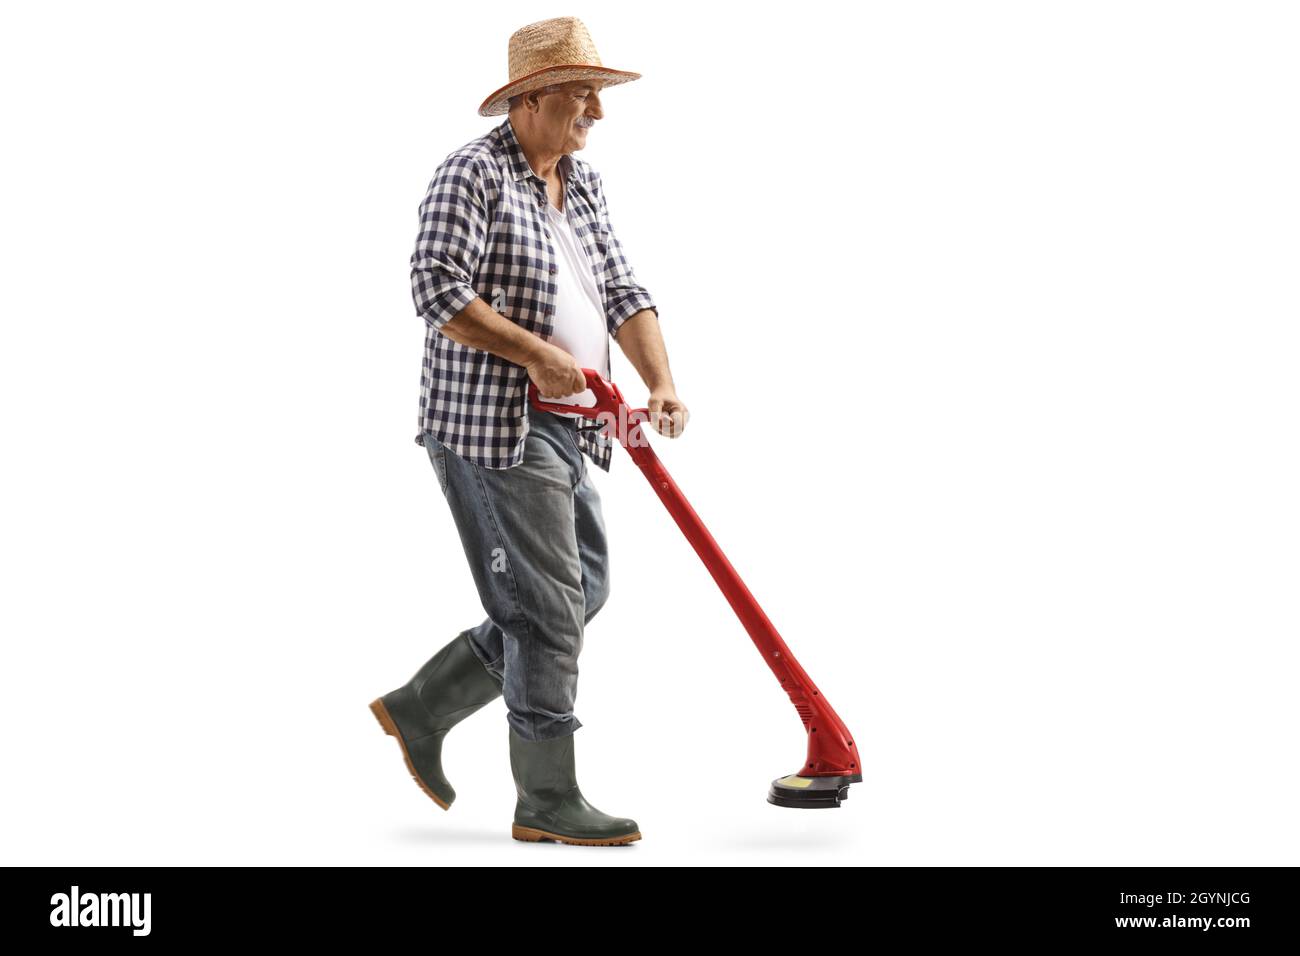 Full length shot of a mature man walking and using a grass trimmer isolated on white background Stock Photo